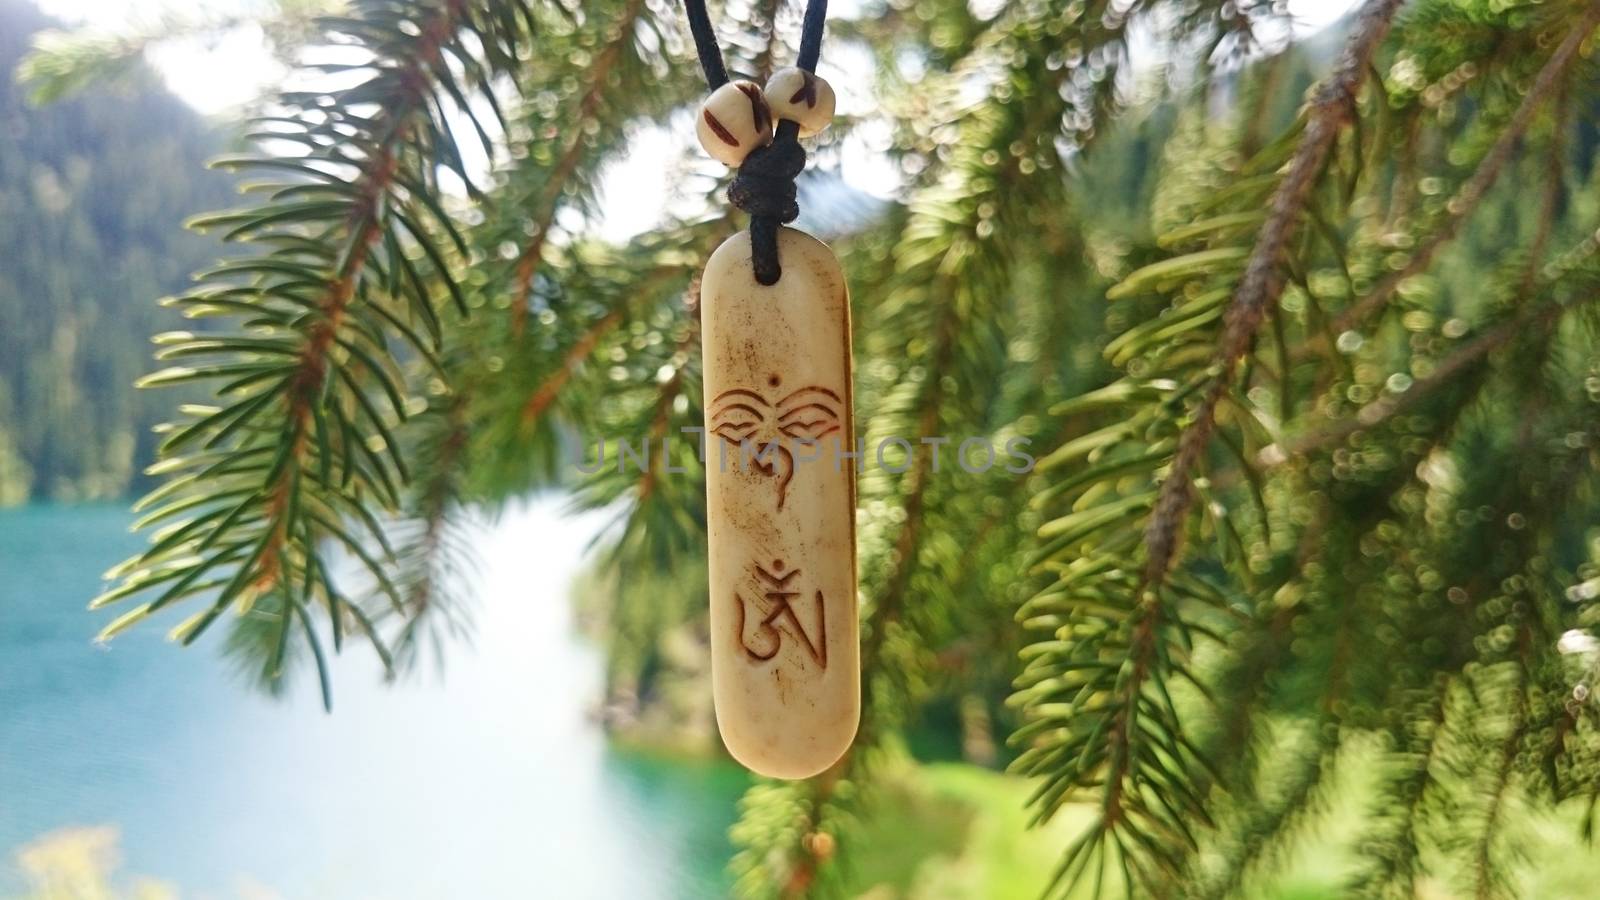 Macro symbol OM (AUM). A locket with OM symbol. The background is blurred. Coniferous trees, a lake, fir branches, blue and green water of the lake are visible. Mountain lake. Kazakhstan, Almaty.